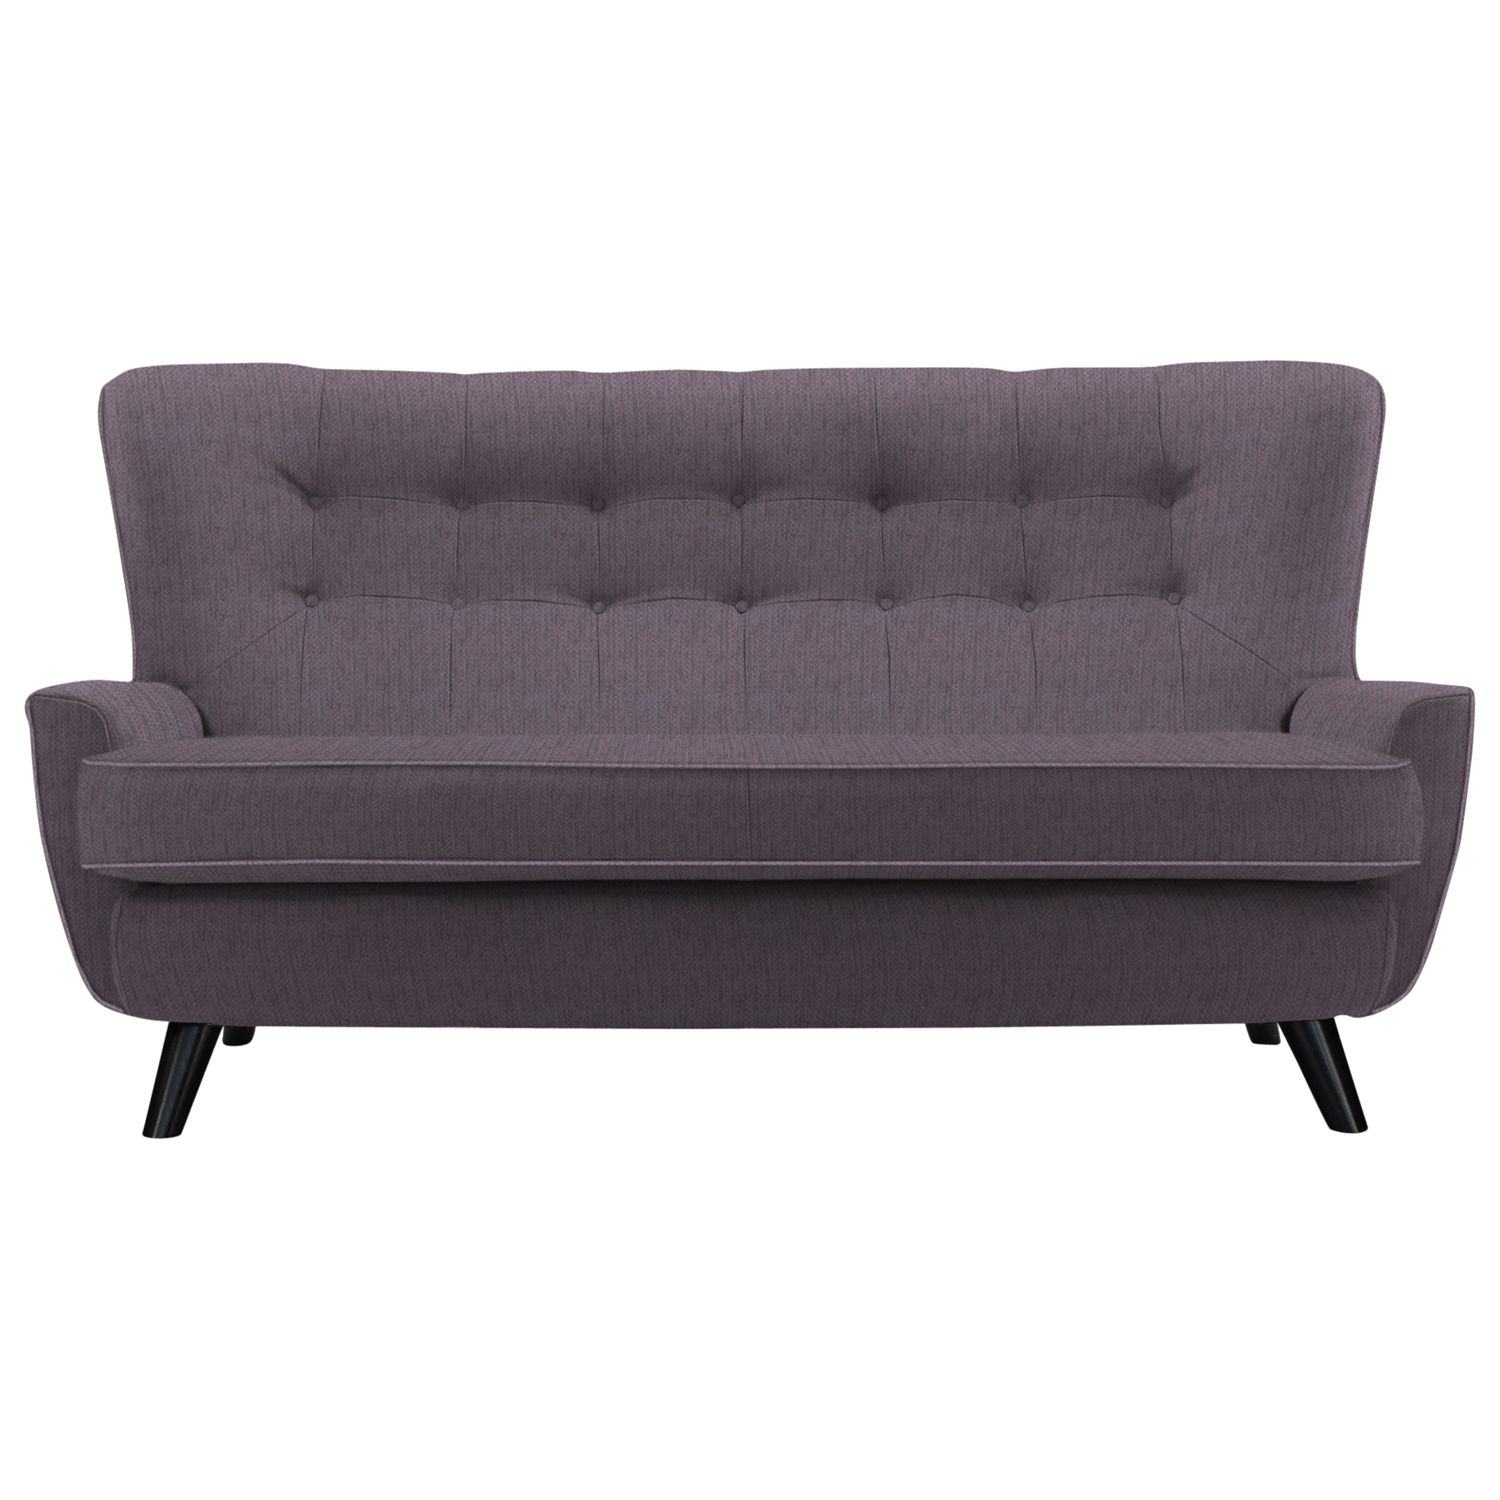 G Plan Vintage The Sixty One Large Sofa, Weave Plum, width 185cm